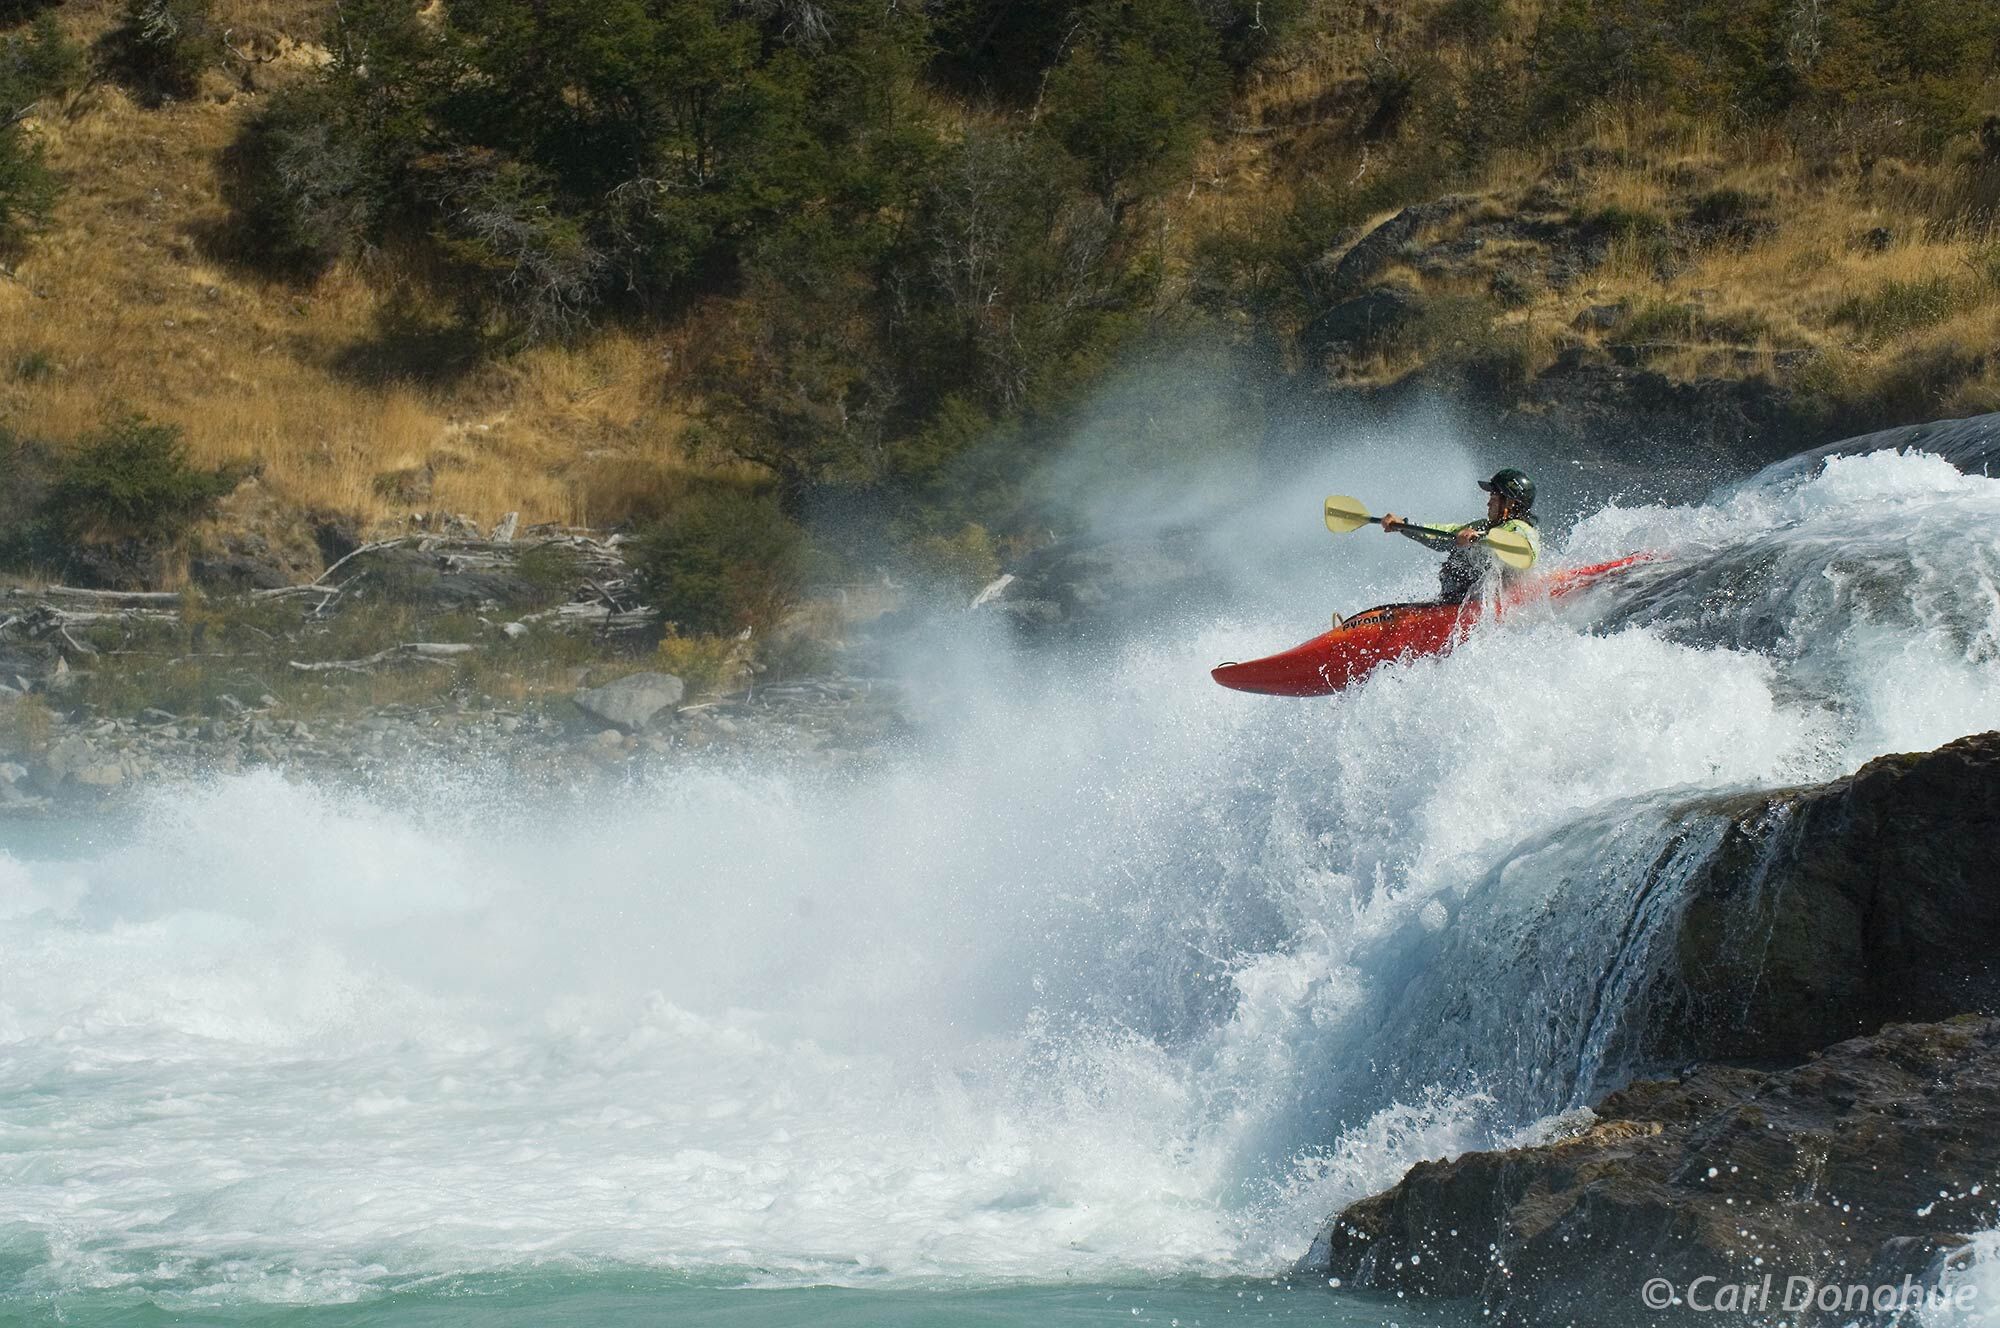 Whitewater kayaking at it's best. The Rio Baker, or Baker River, in southern Patagonia, Chile offers some of the best whitewater...